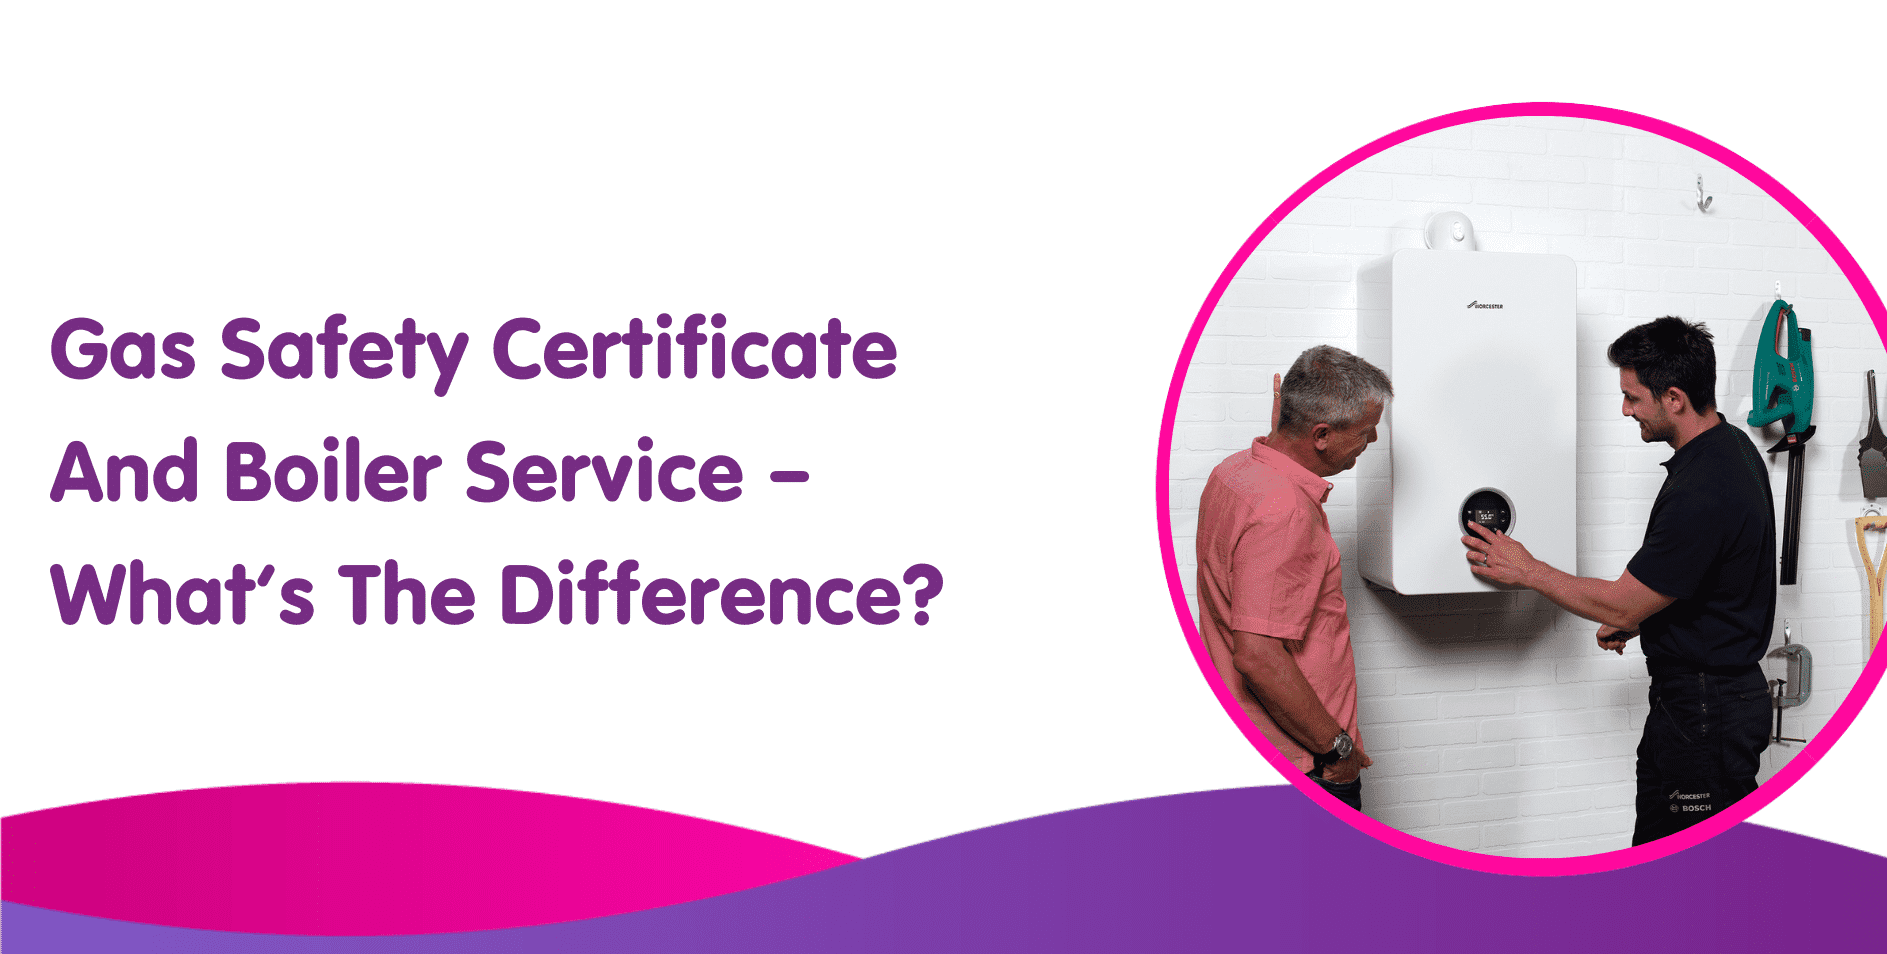 Gas Safety Certificate And Boiler Service – What’s The Difference